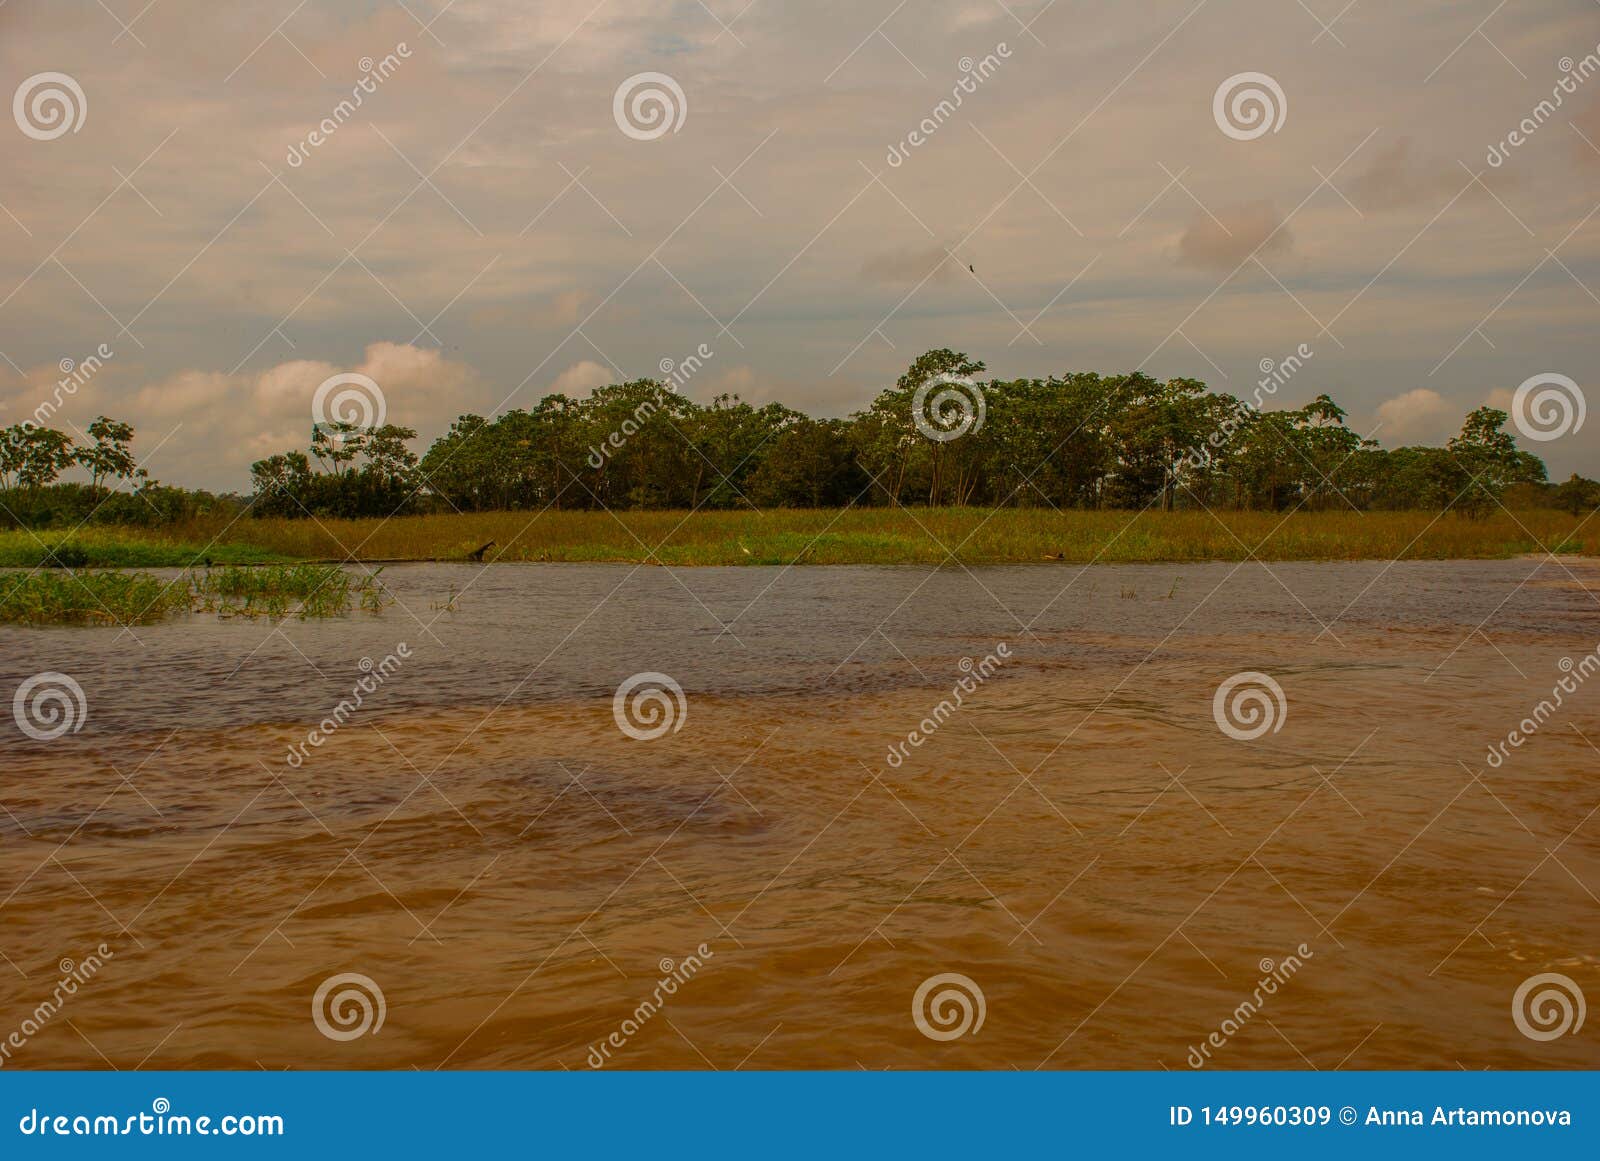 manaus, amazonas, brazil: the merger of the two colored river, rio negro, solimoes. meeting, multi-colored waters do not mix, and